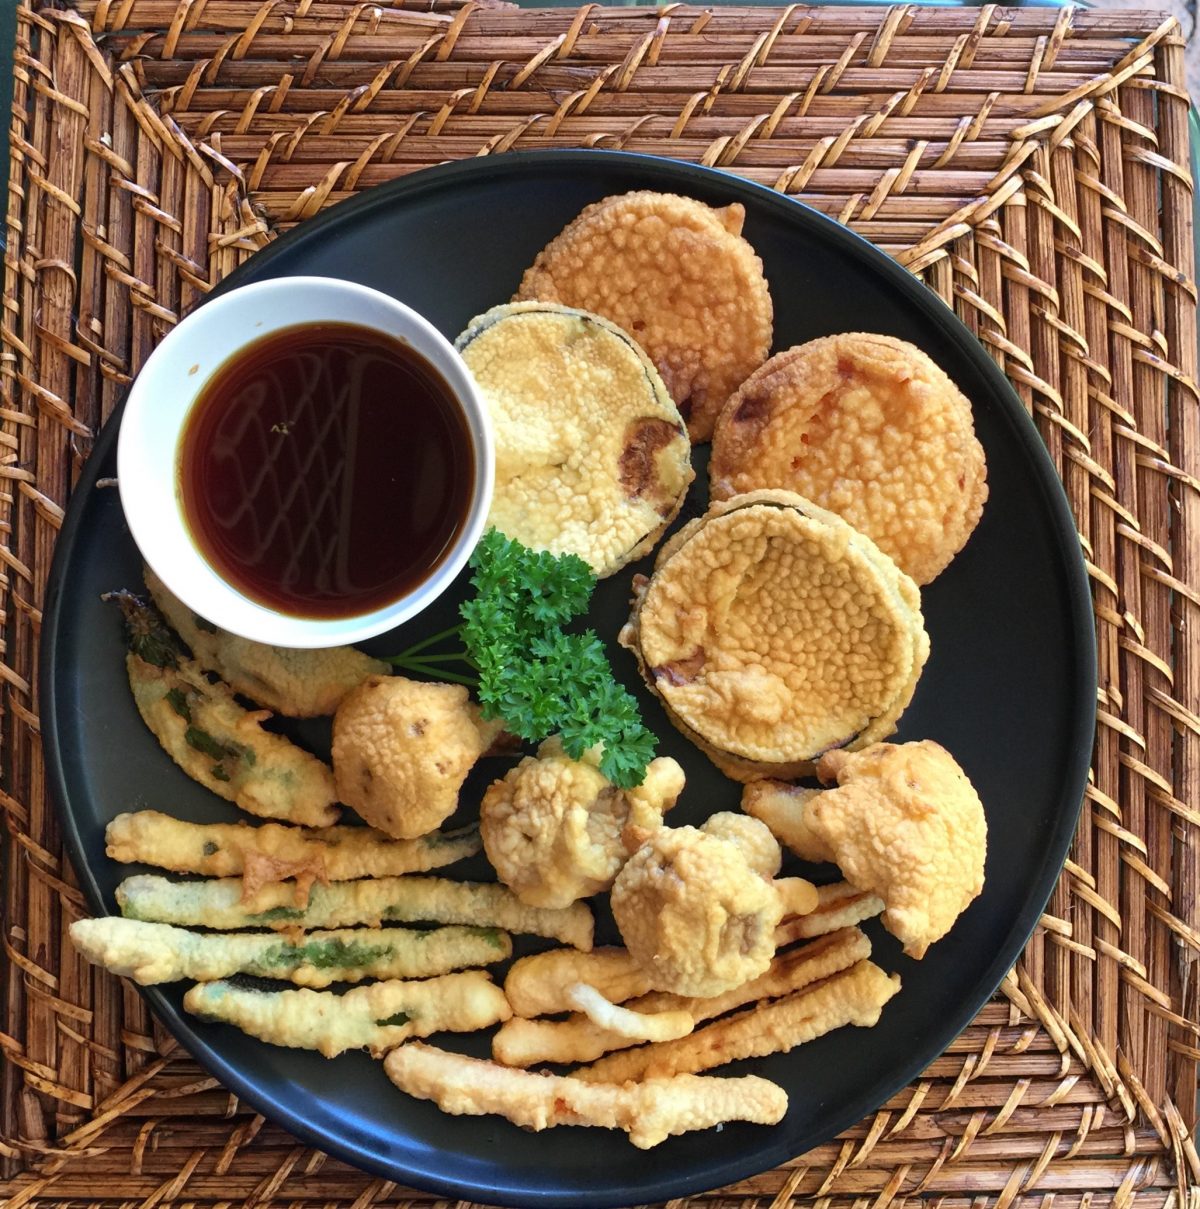 Tempura Vegetables and Sauce by cooking meals for one